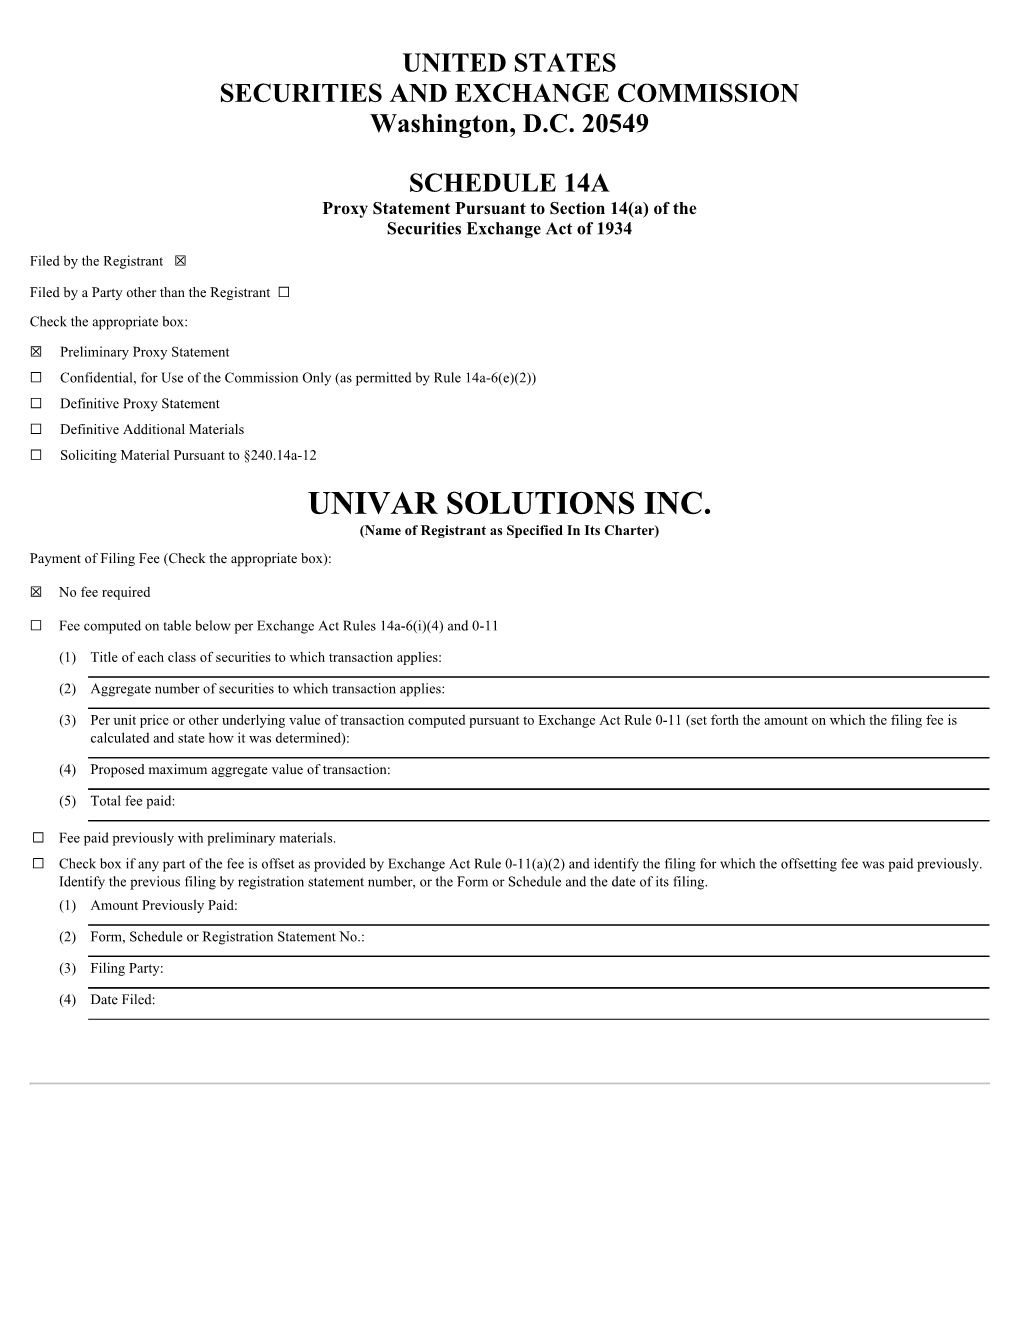 UNIVAR SOLUTIONS INC. (Name of Registrant As Specified in Its Charter) Payment of Filing Fee (Check the Appropriate Box)